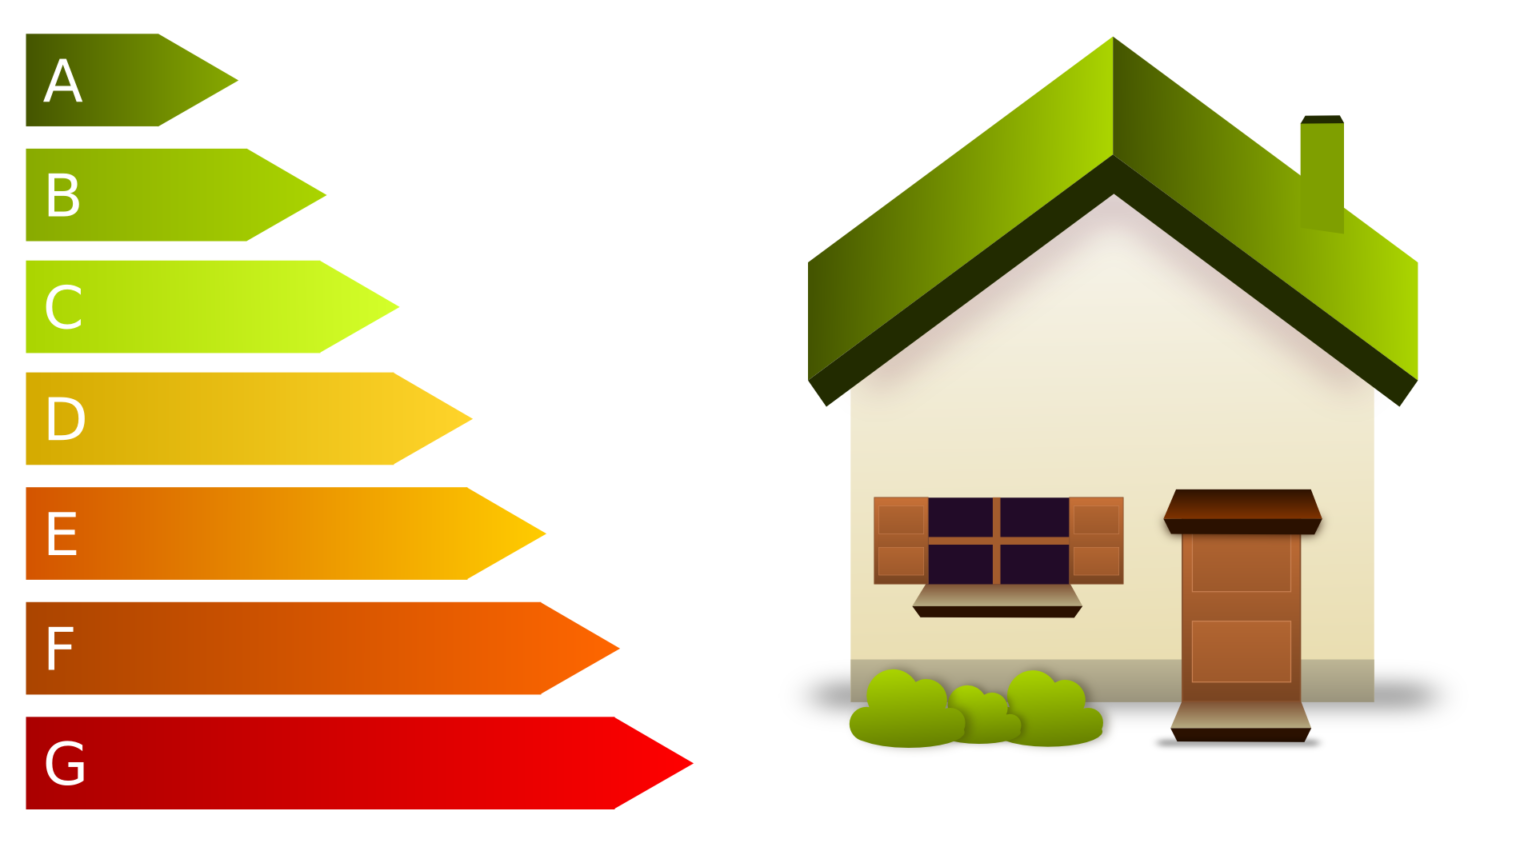 Graphic showing energy efficiency ratings